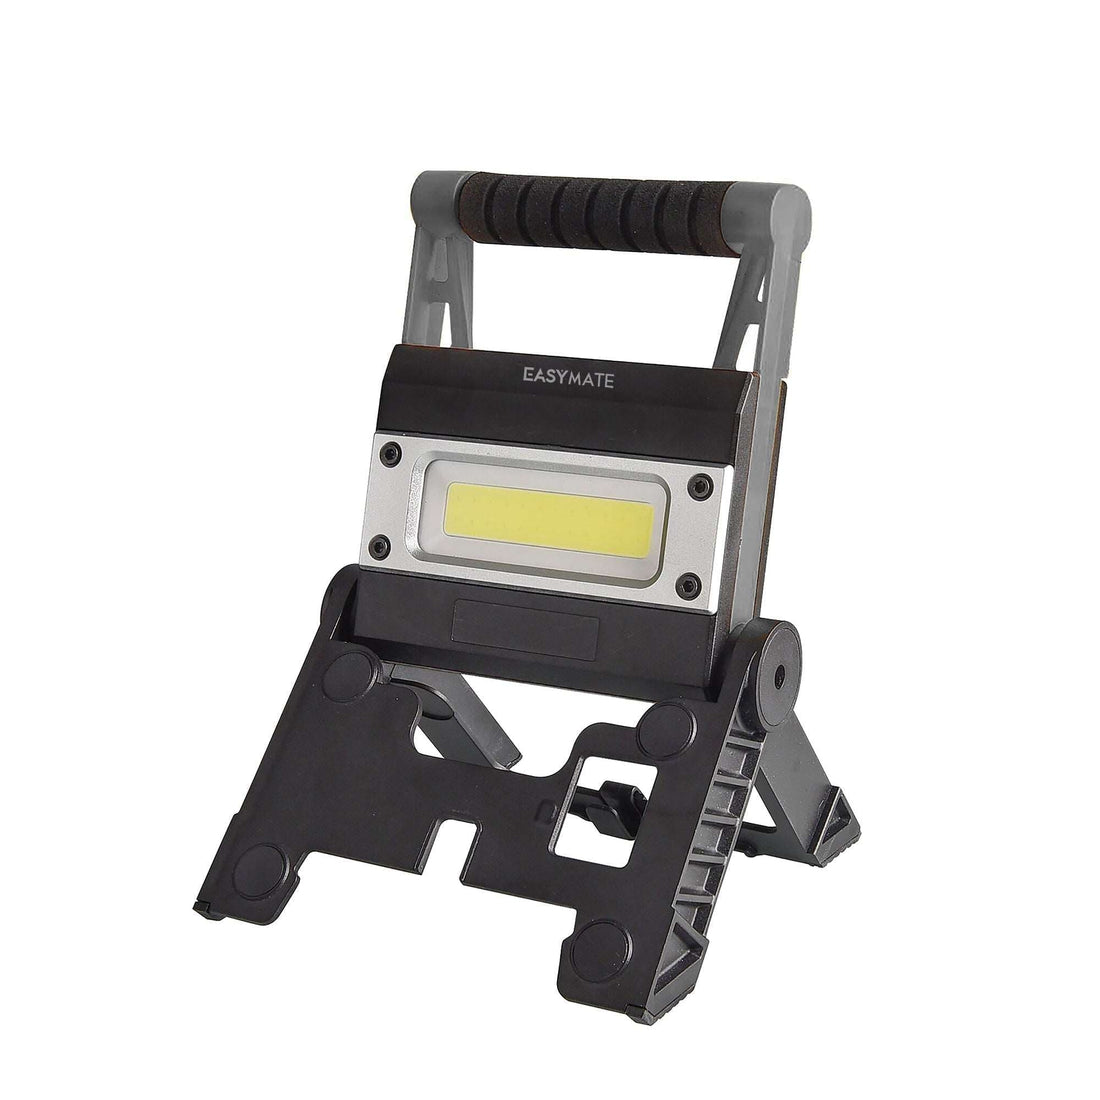 10 W WORKLIGHT WITH RECHARGEABLE LITHIUM BATTERY AND MAGNETS - best price from Maltashopper.com BR420006567